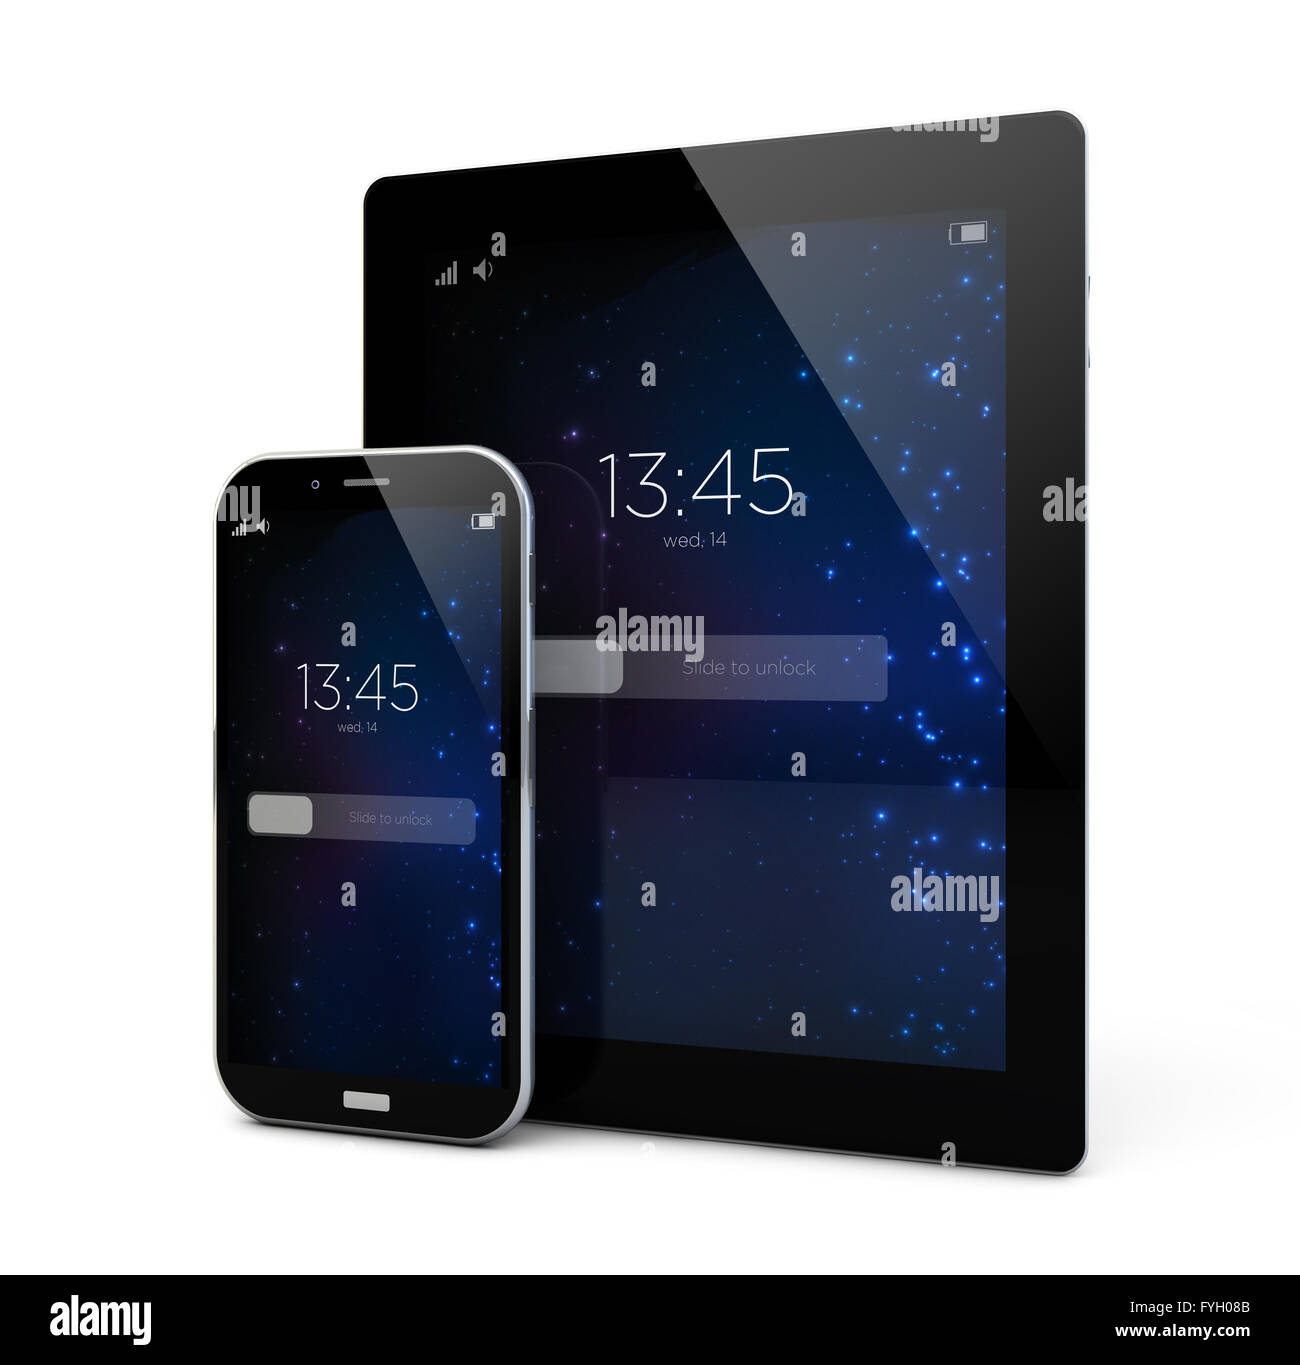 render of locked smartphone and tablet Stock Photo